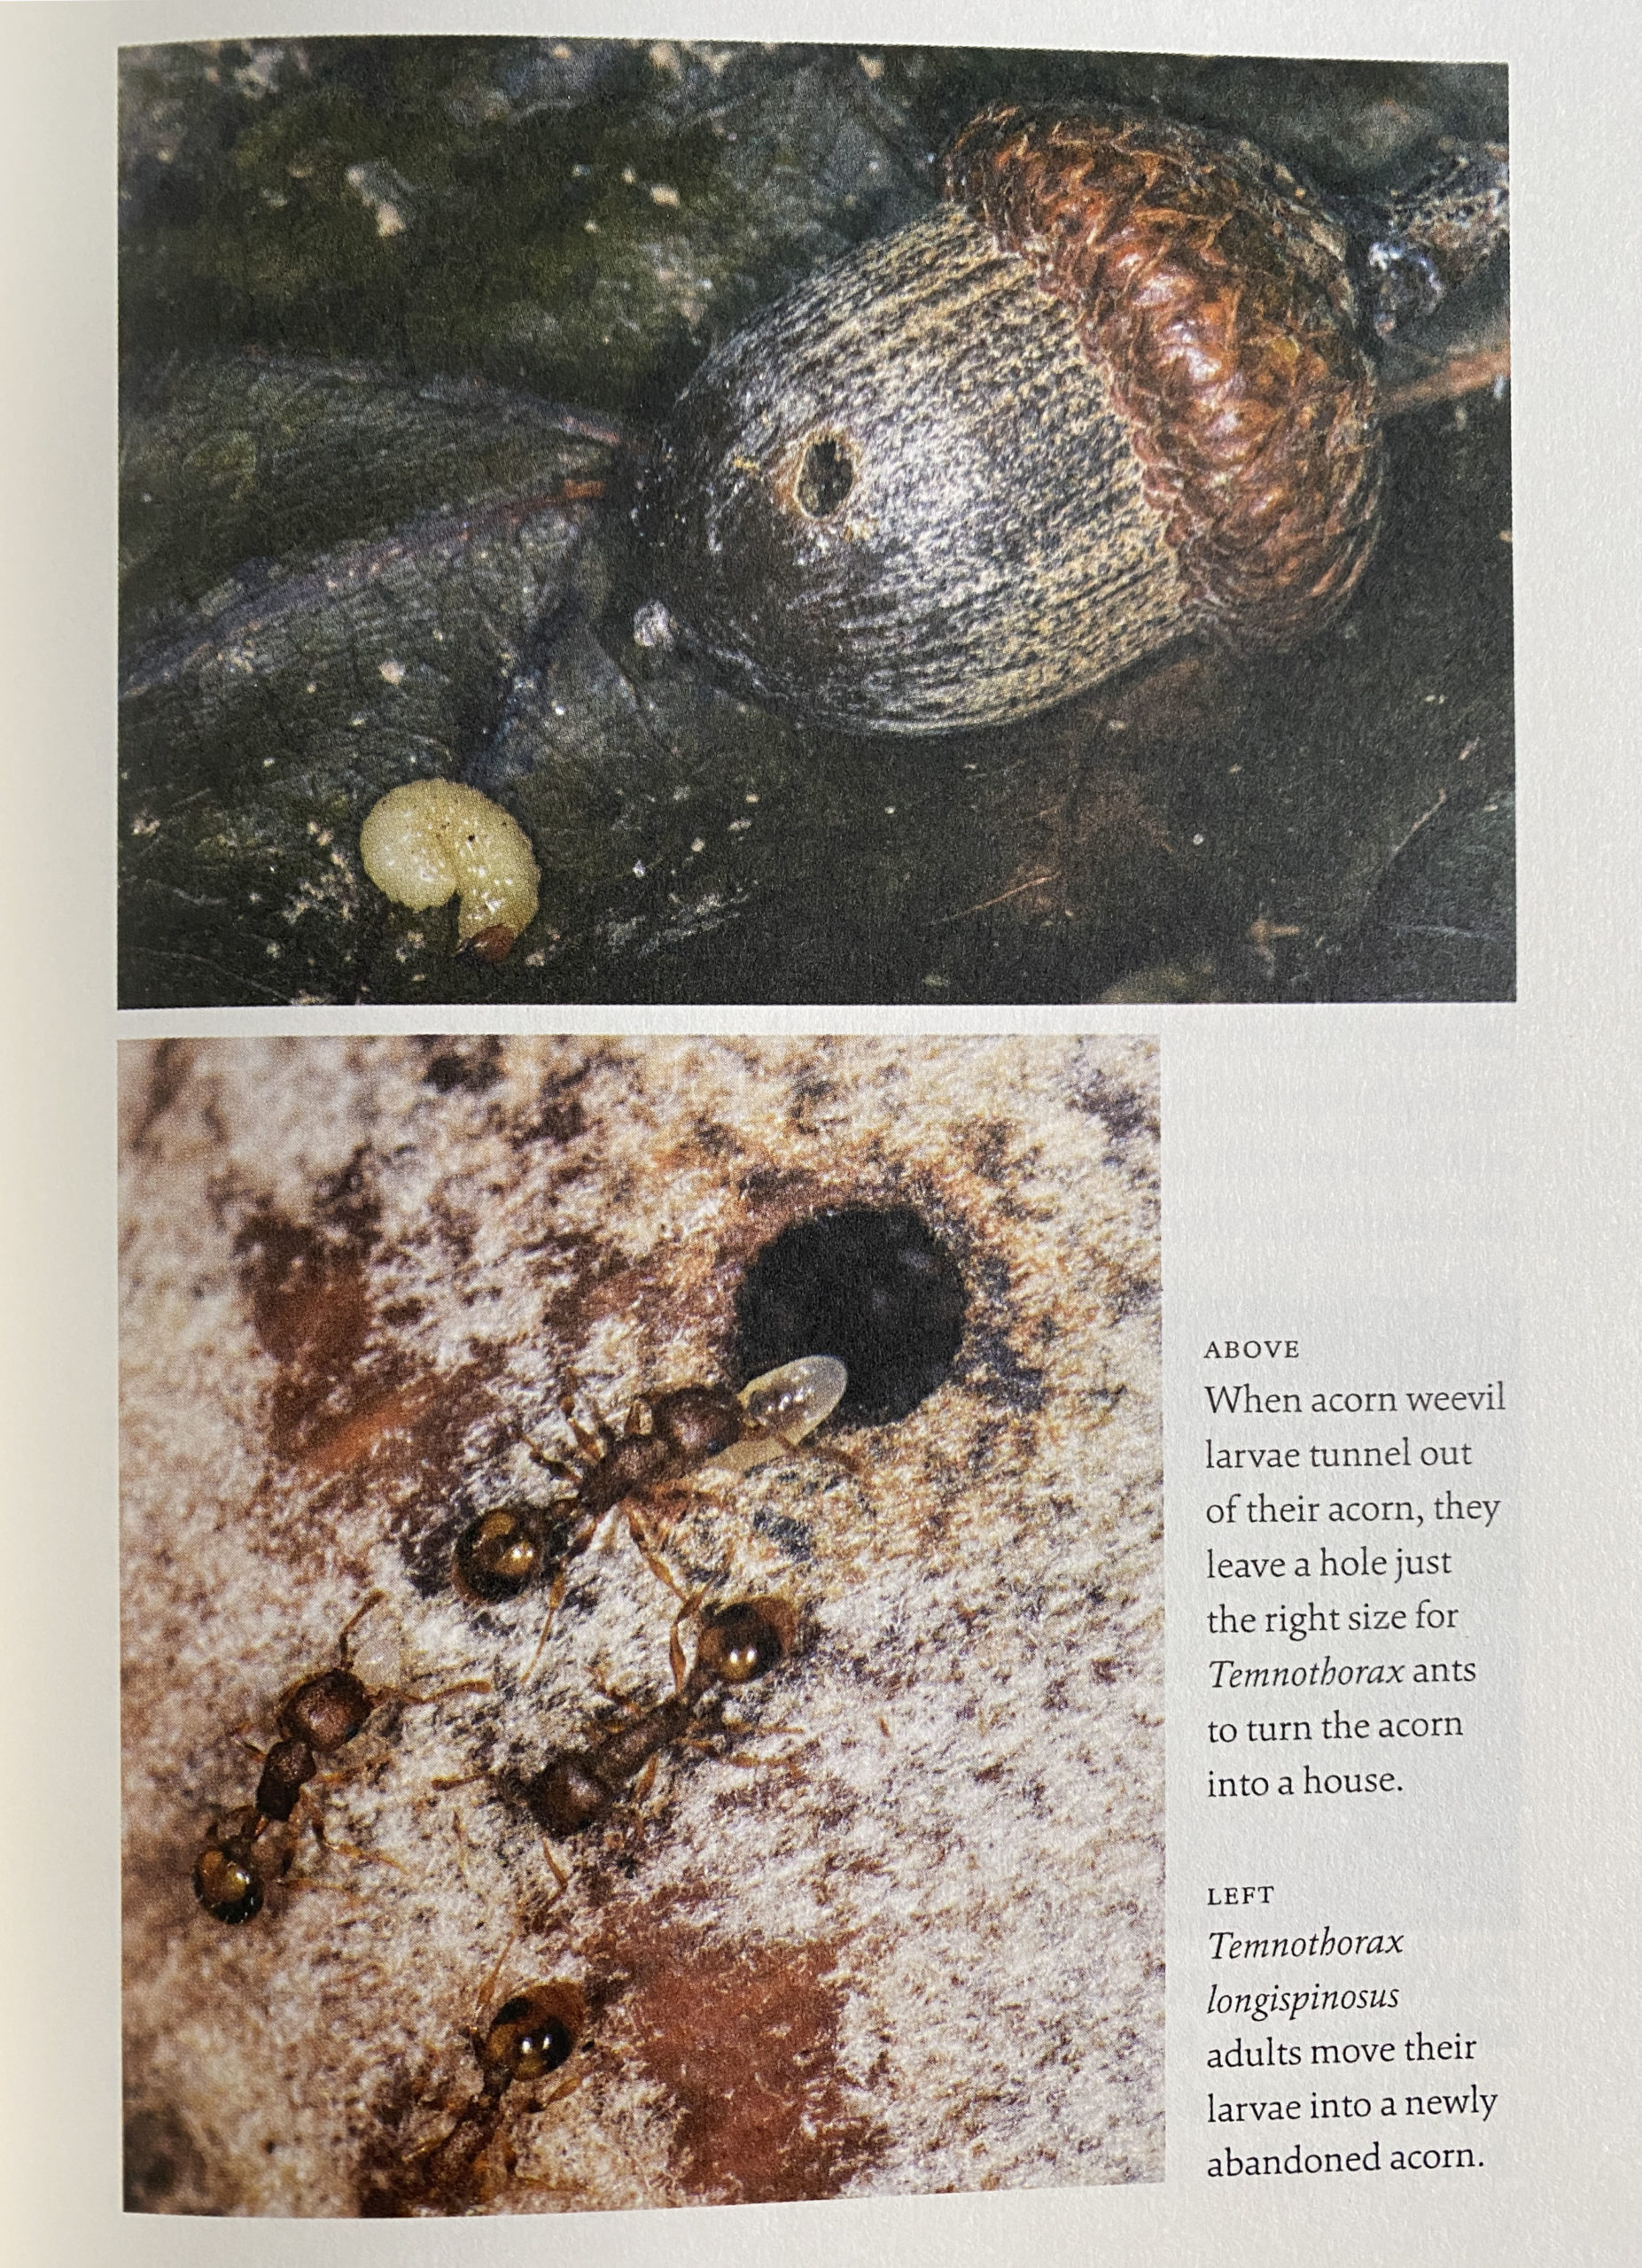 photo of a book depicting images of an acorn and acorn weevil (above) and ants transporting their larvae (below)